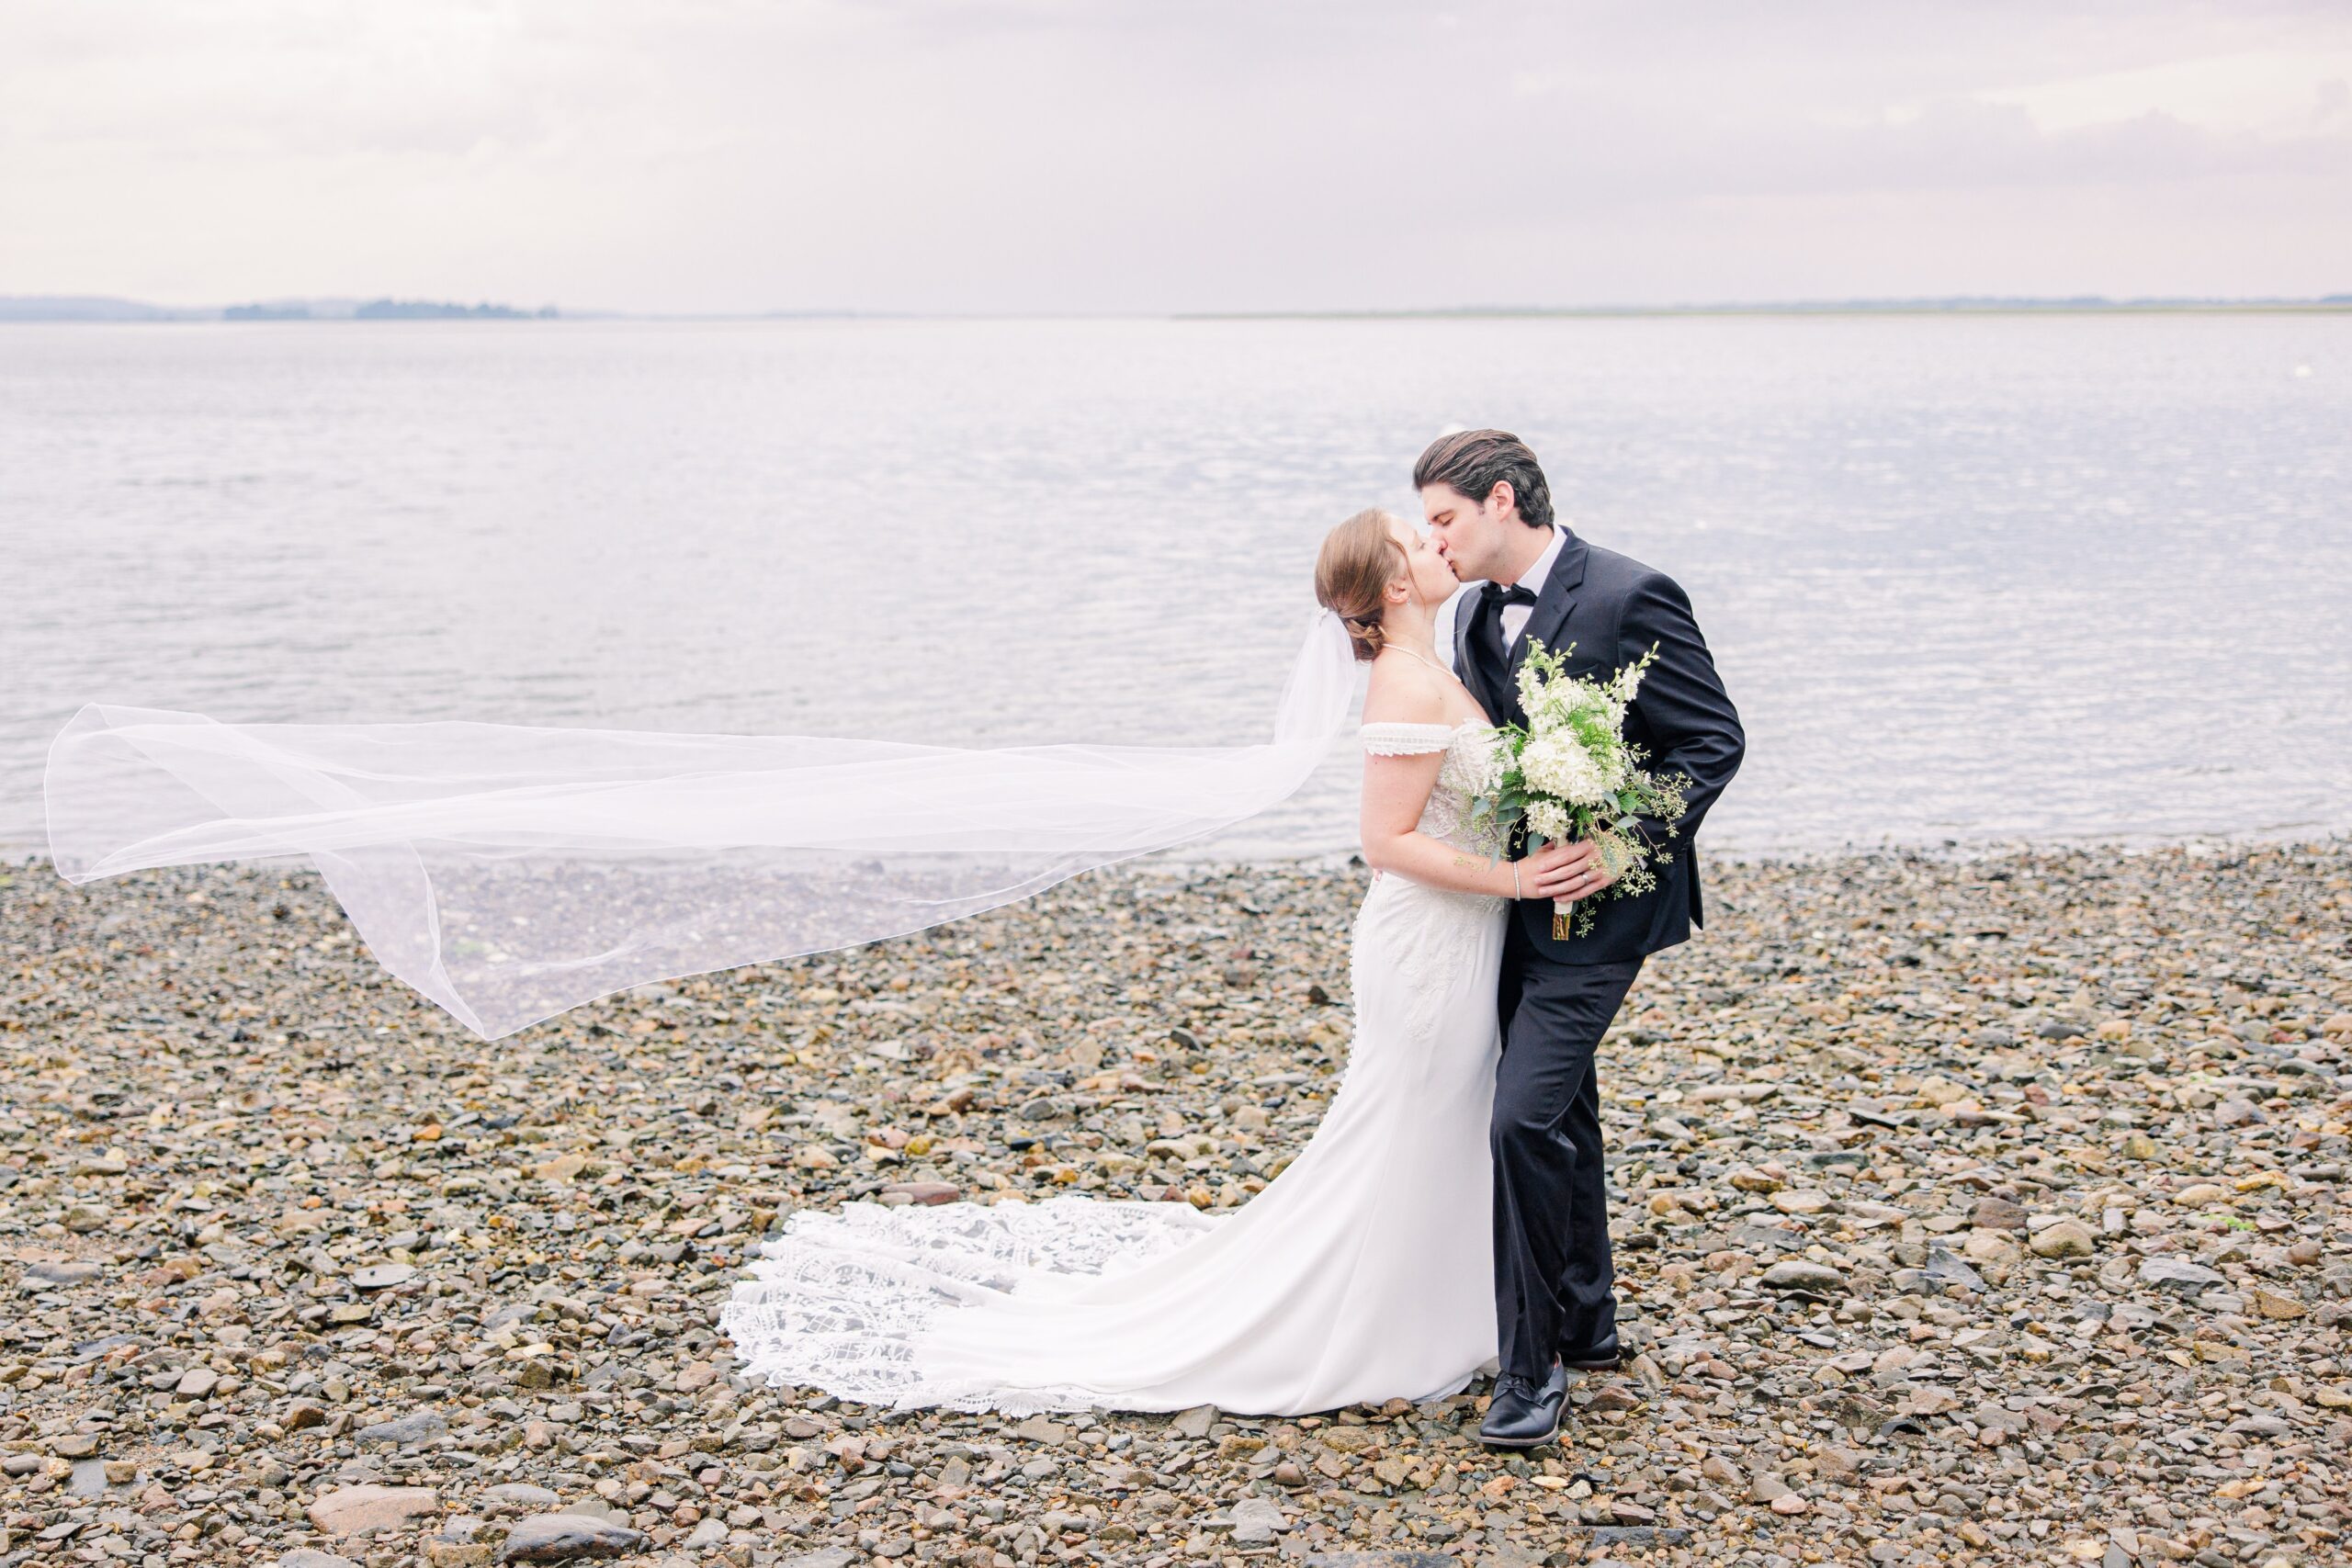 Bride and groom on the beach with veil flowing behind the bride